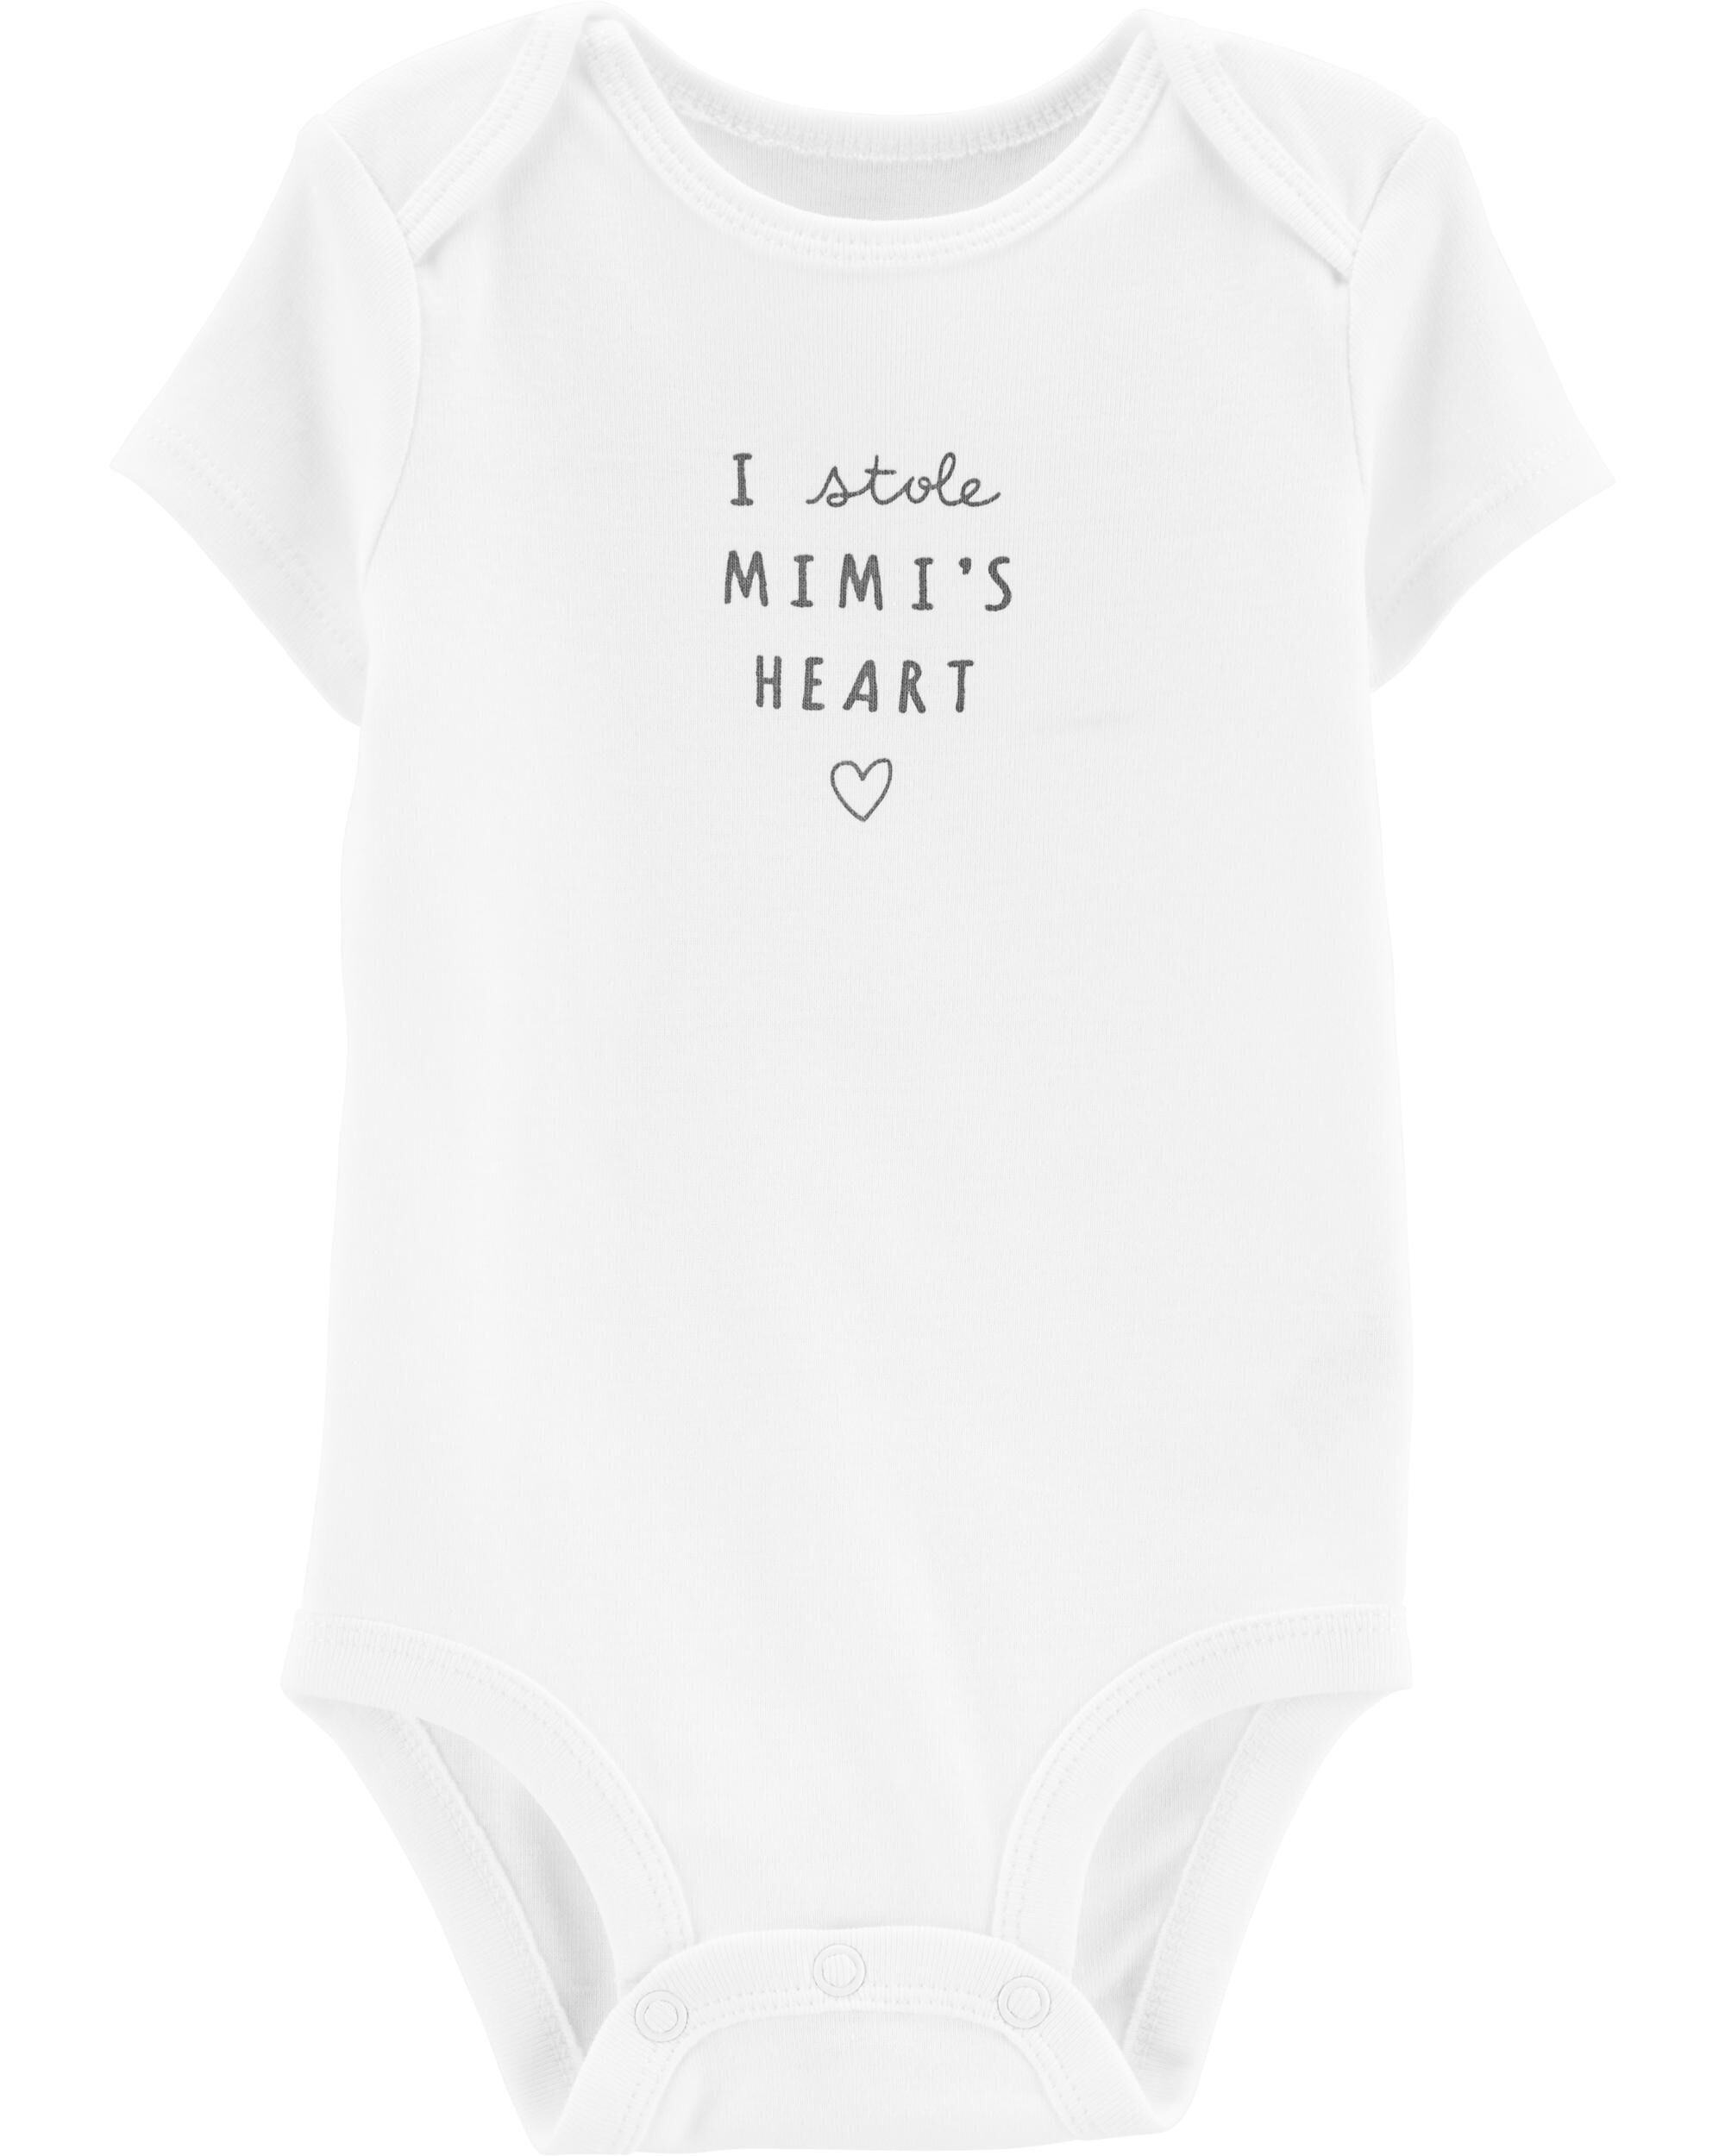 heart baby clothes